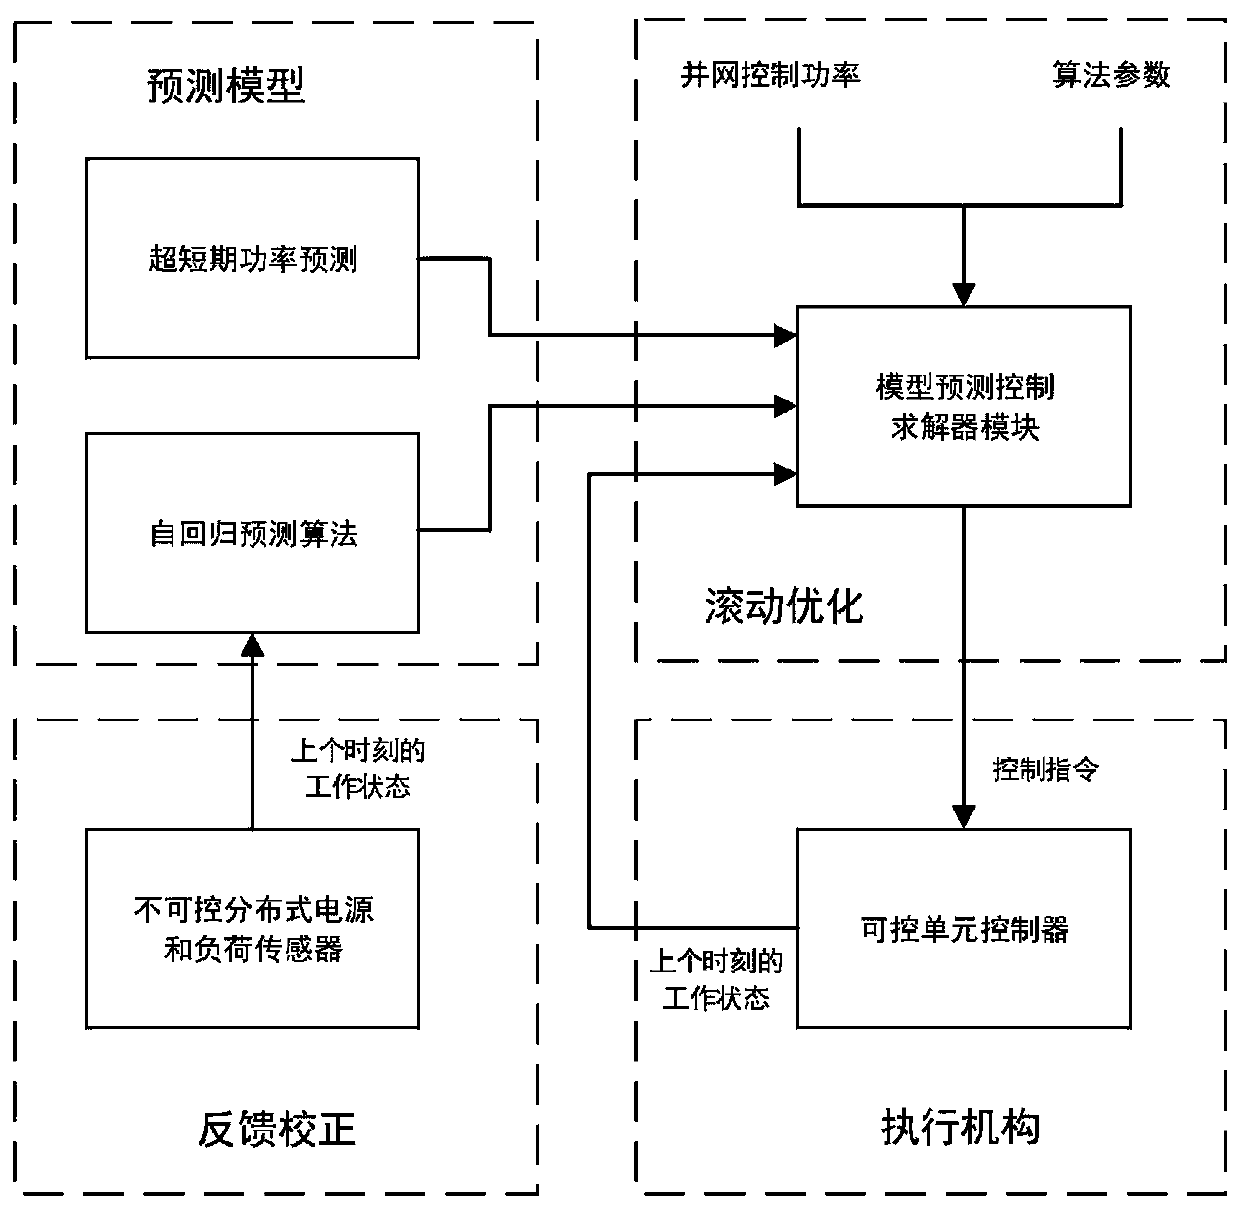 Grid-connected power control method for distribution network autonomous area based on model predictive control